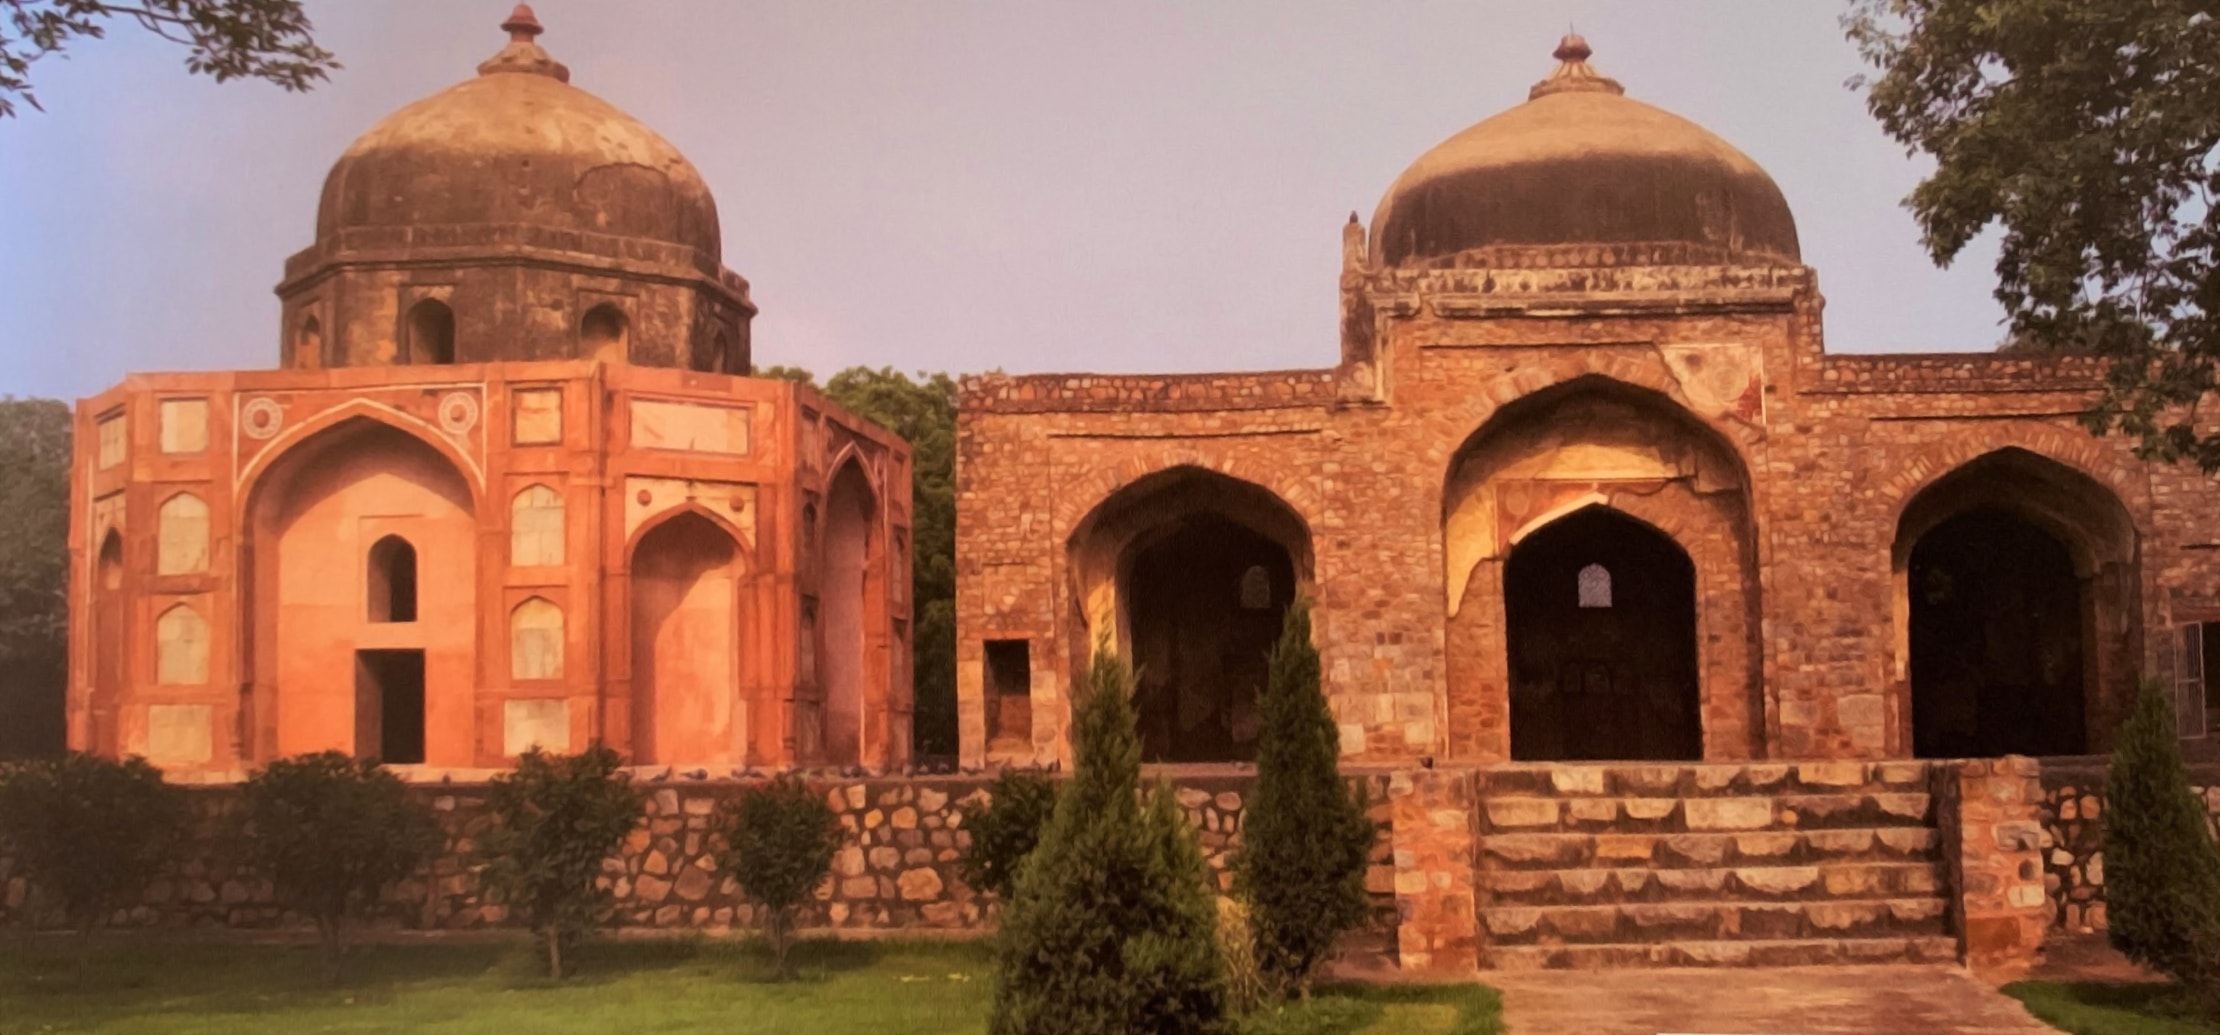 Afsarwala’s Mosque & Tomb (PC - Great Monuments of India)